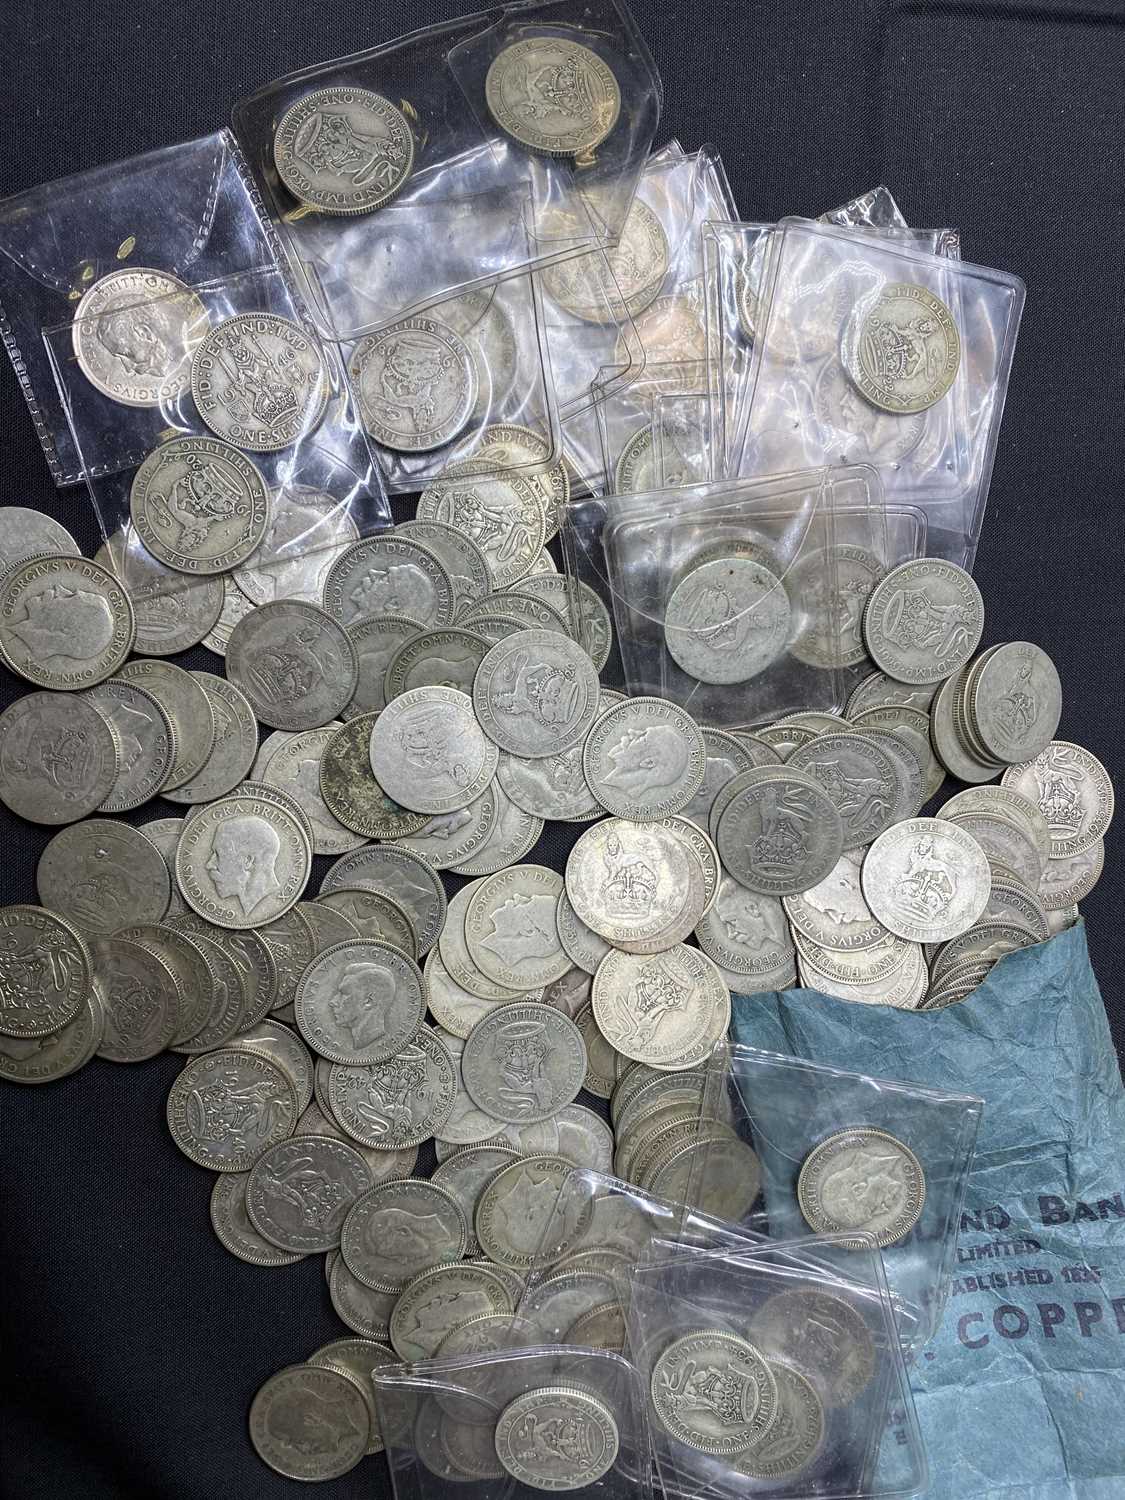 PRE 1947 ONE SHILLING PIECES - 180 pieces approximately, 32.4ozt gross